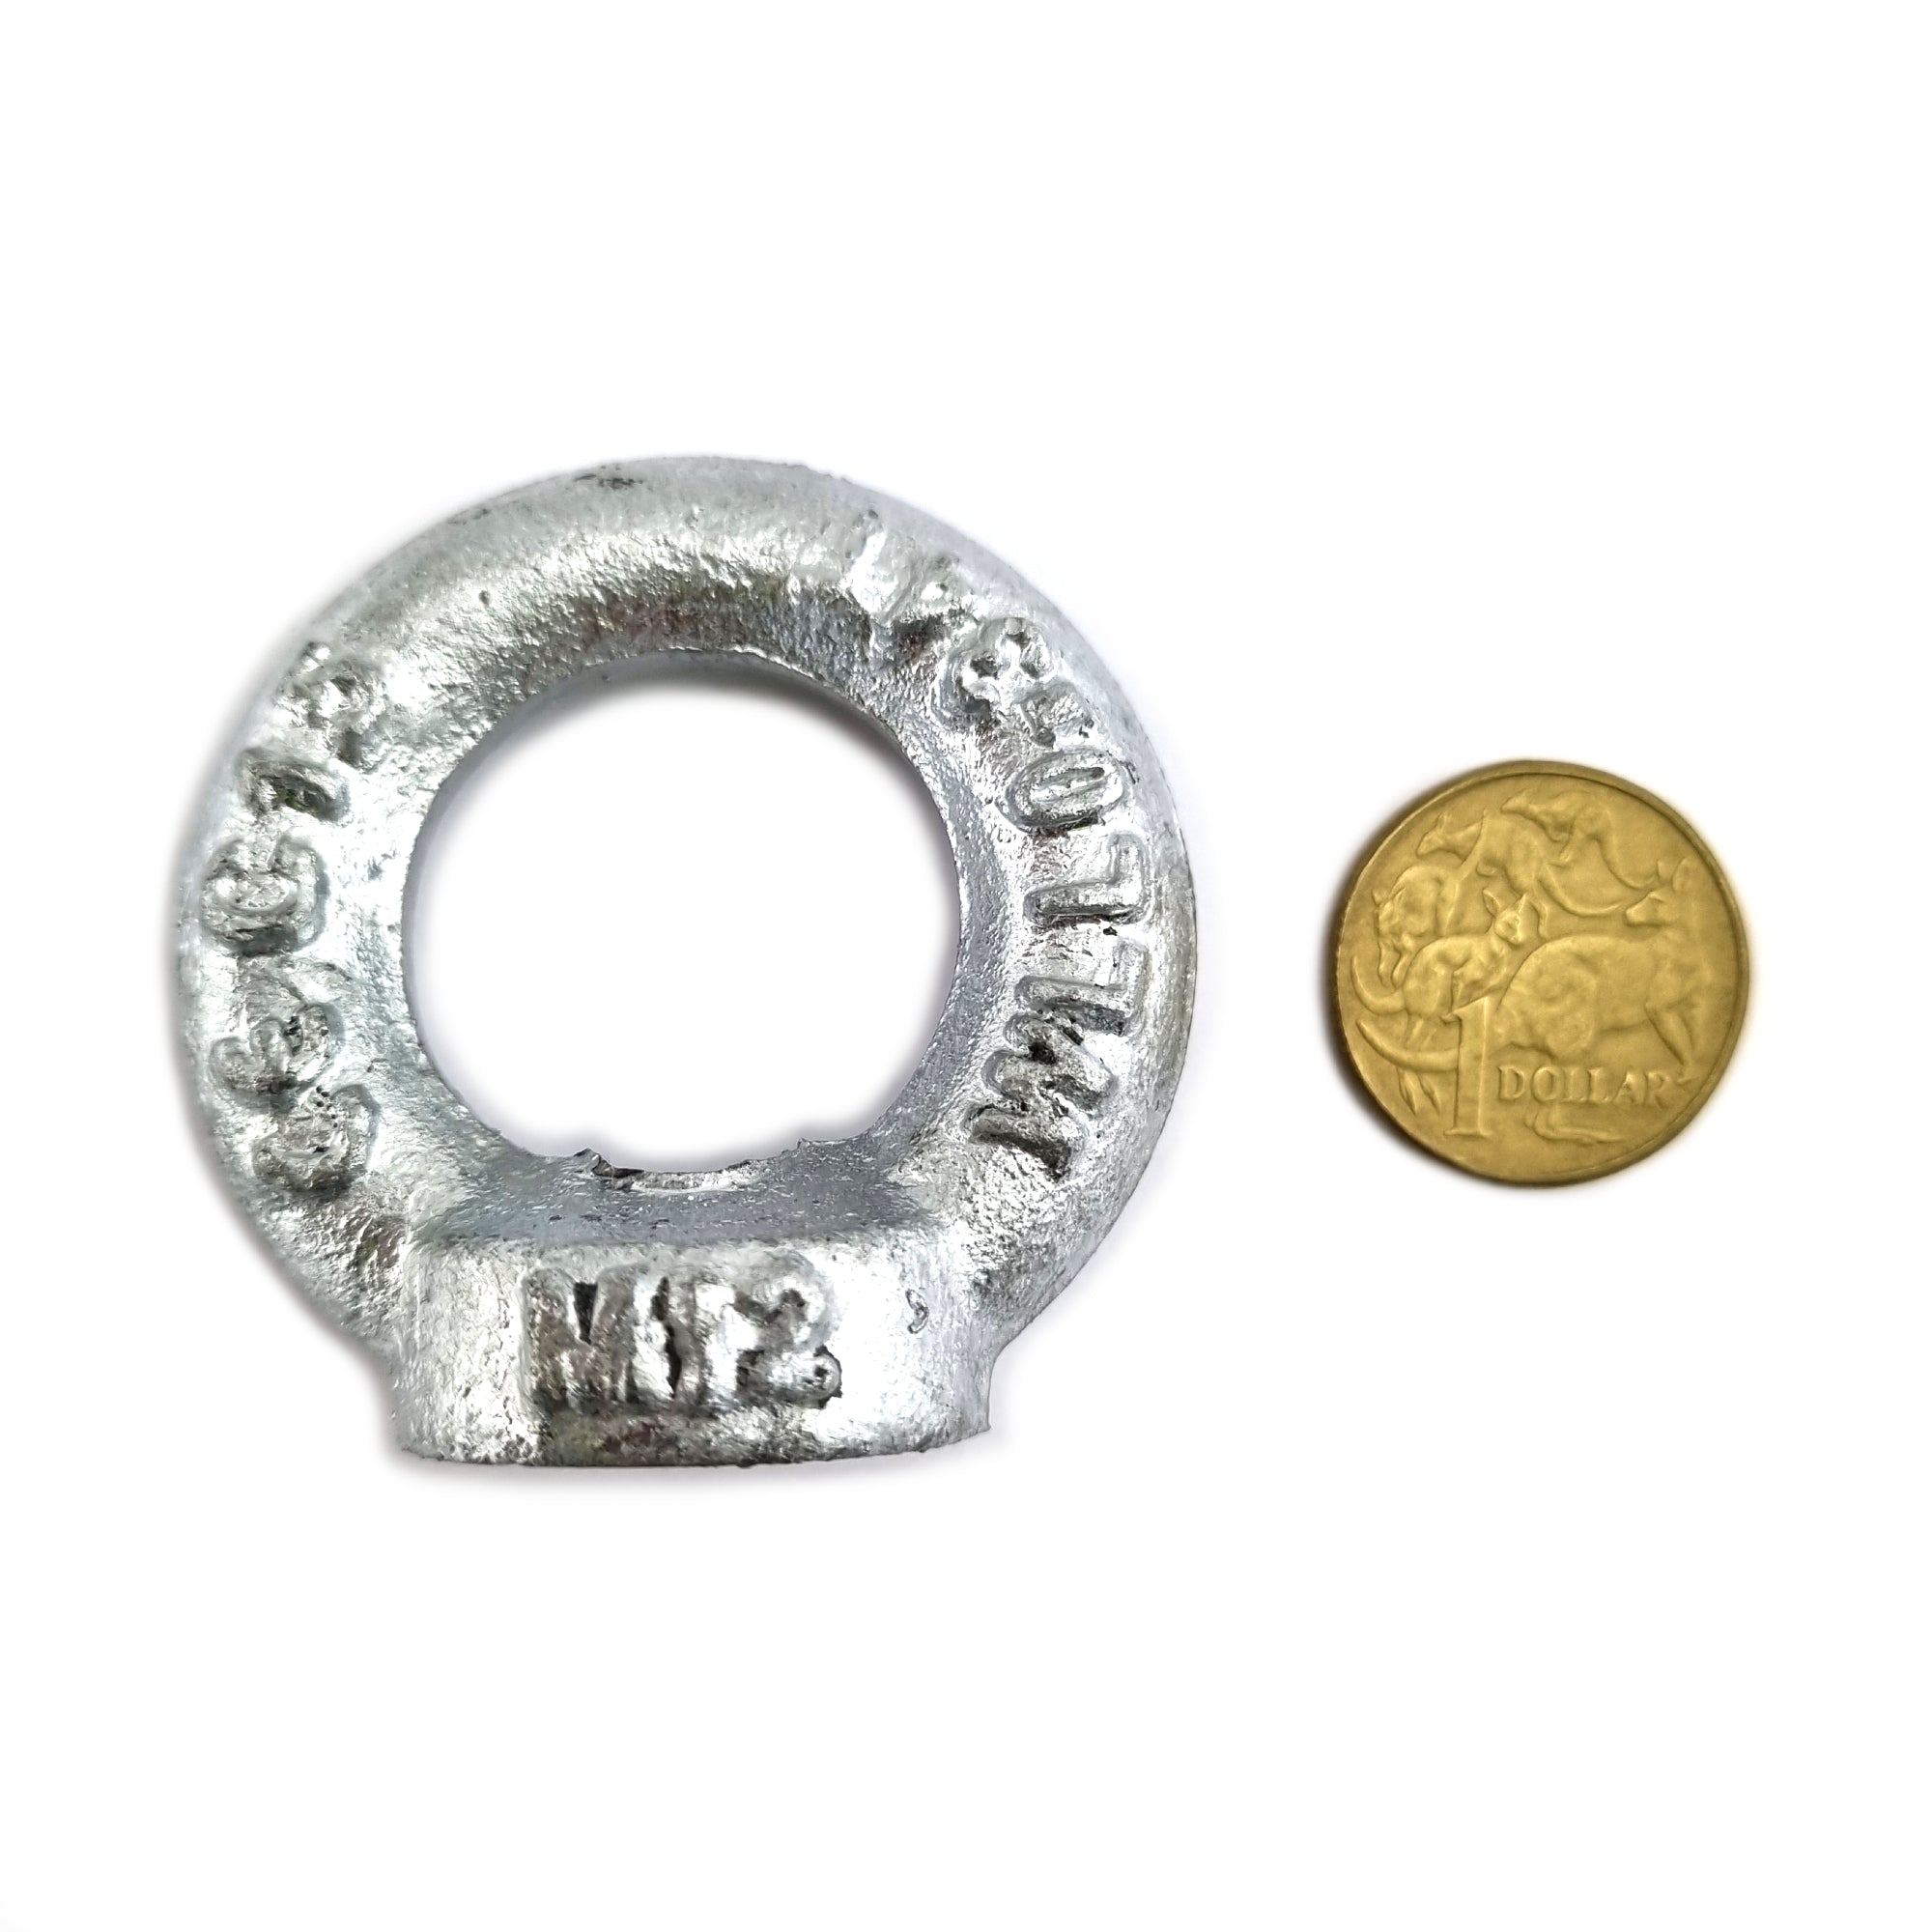 Galvanised lifting nut, size 12mm. Australia wide shipping. Shop hardware online chain.com.au.